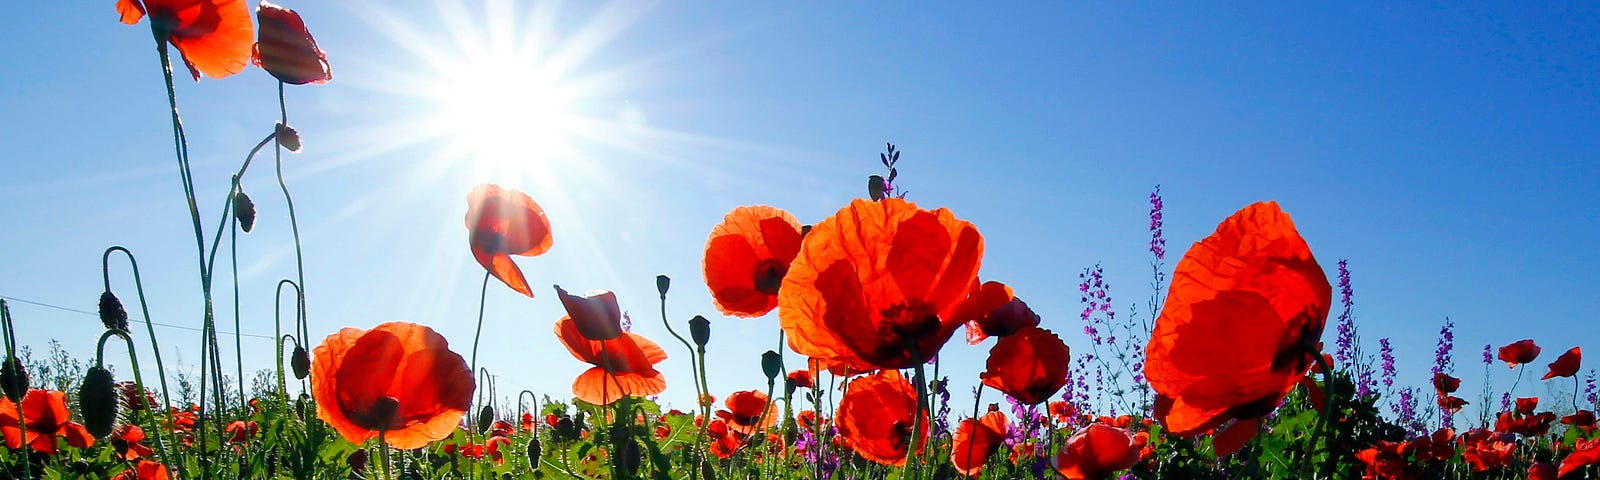 A field of poppies under the sunlit bright blue sky, with other wildflowers.